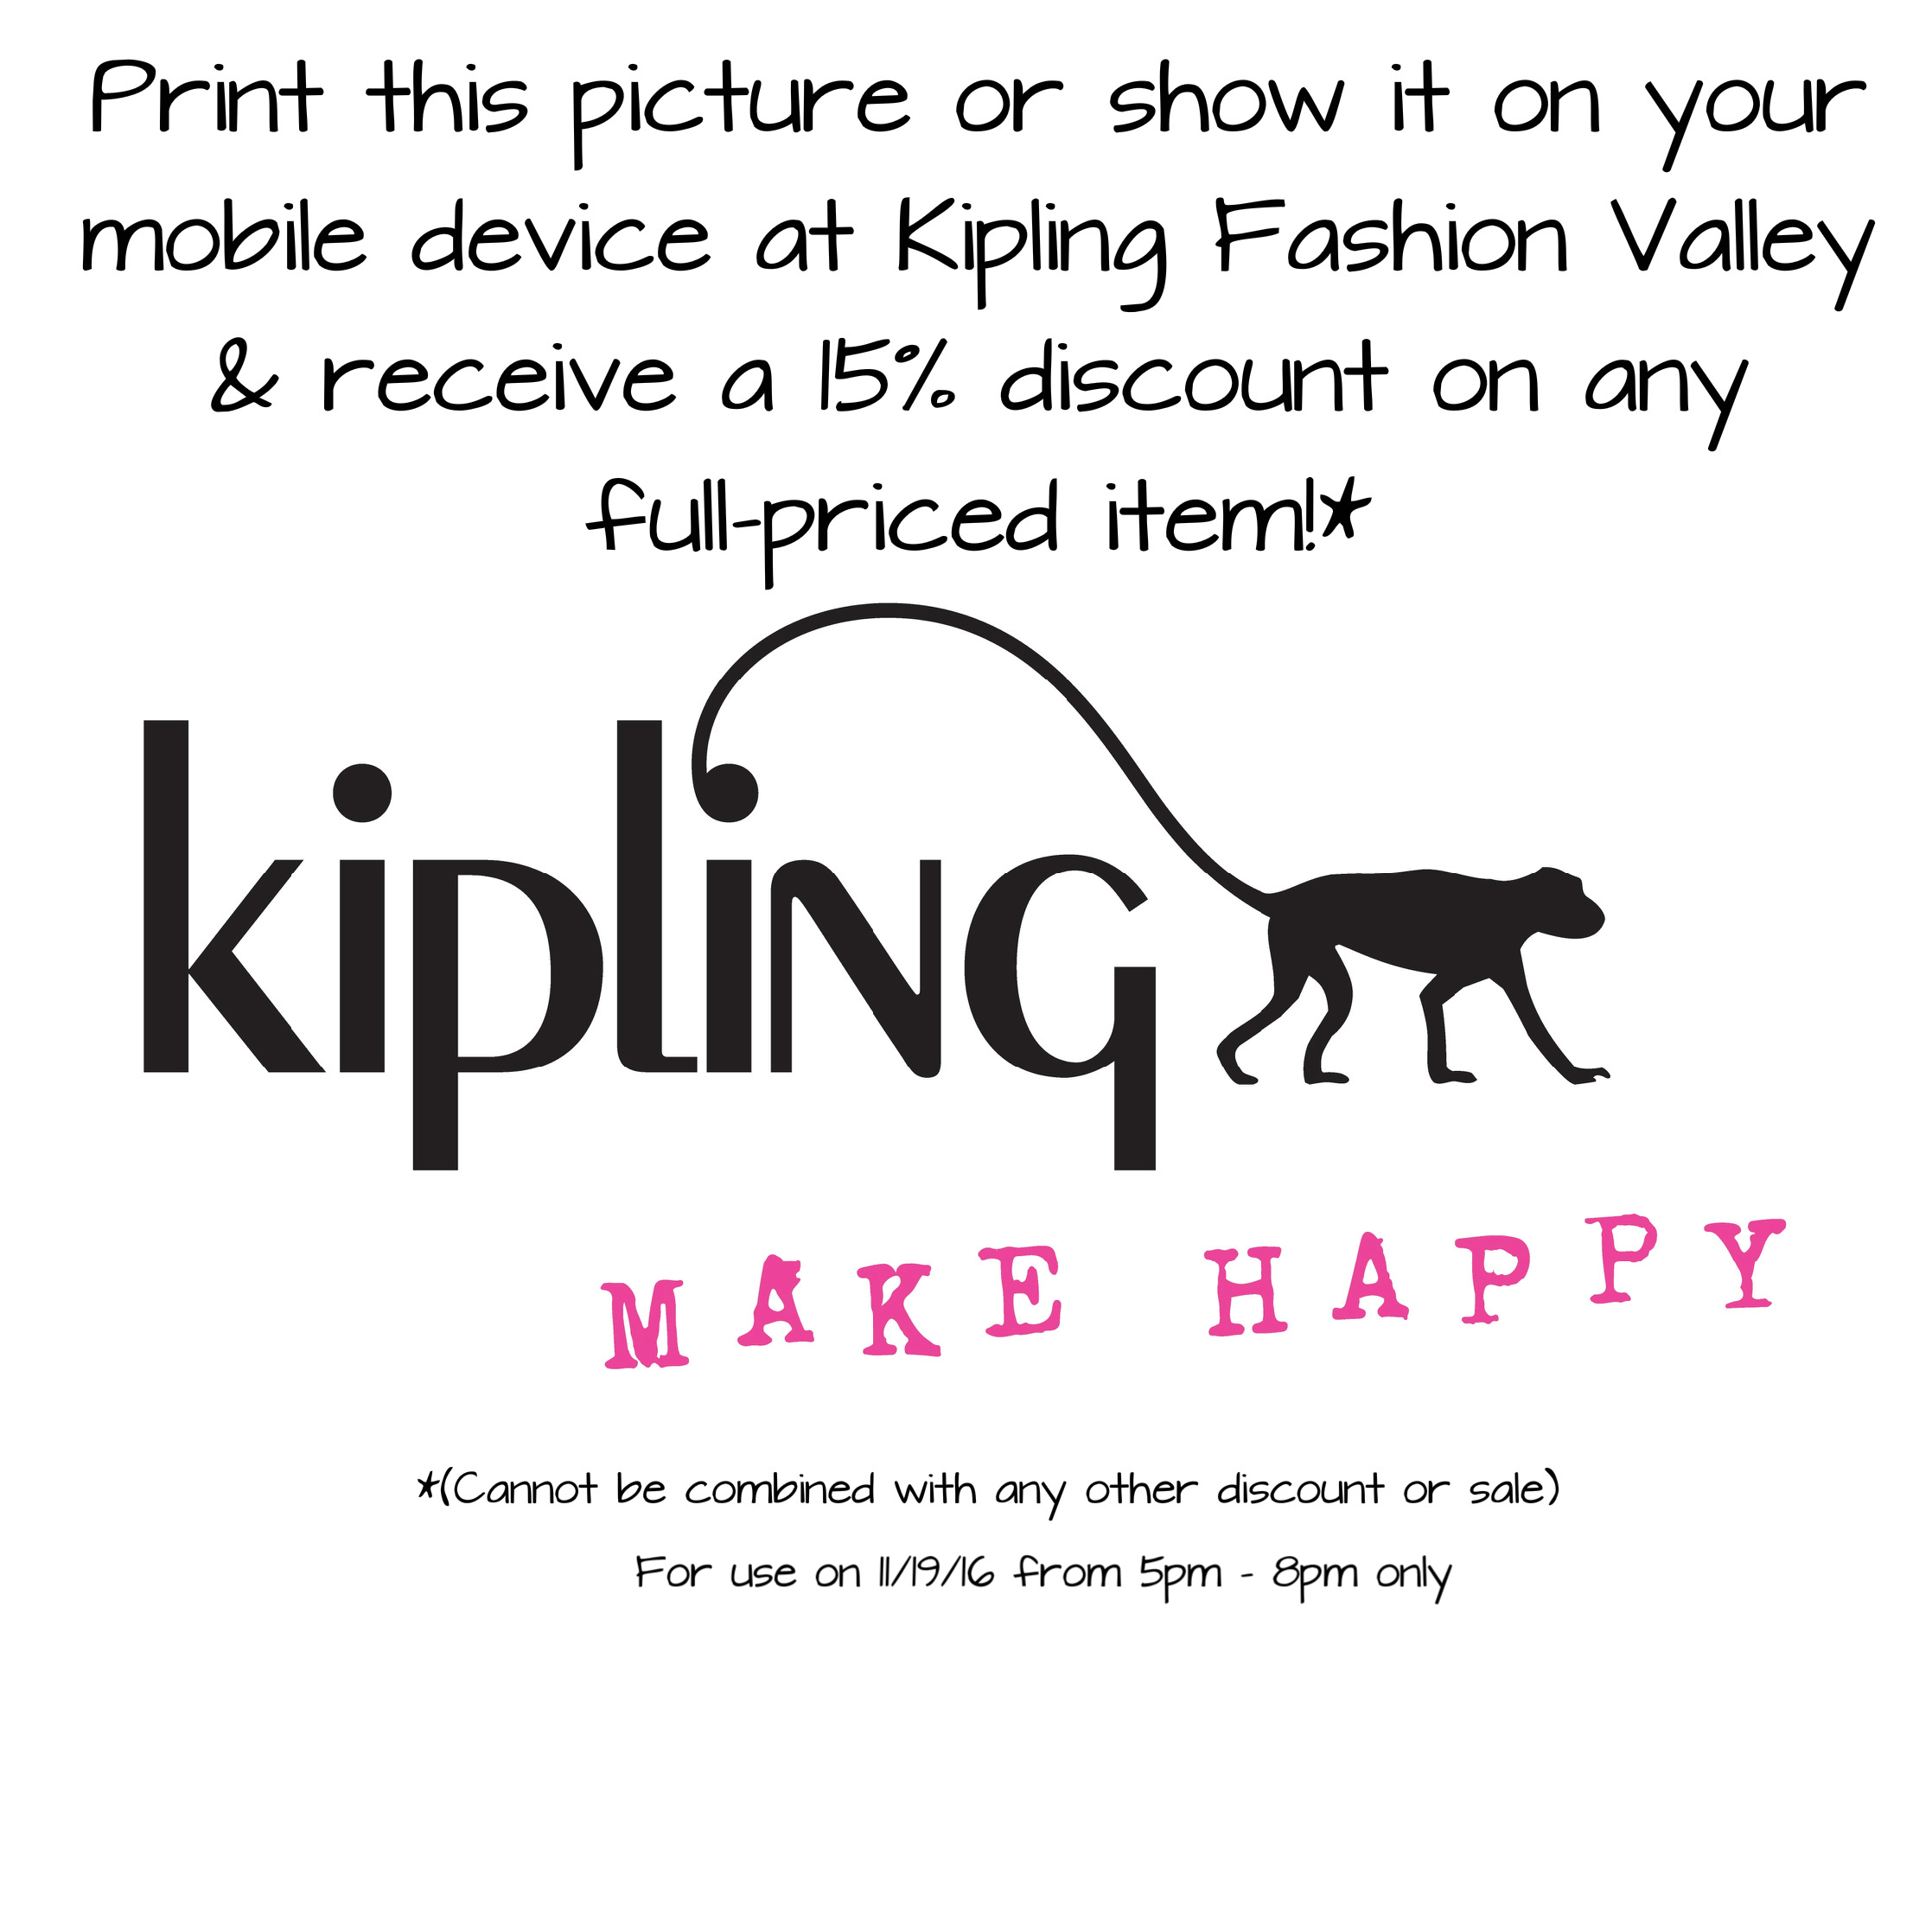 Monkeying Around at Kipling's Fashion Valley Grand Opening! – Any